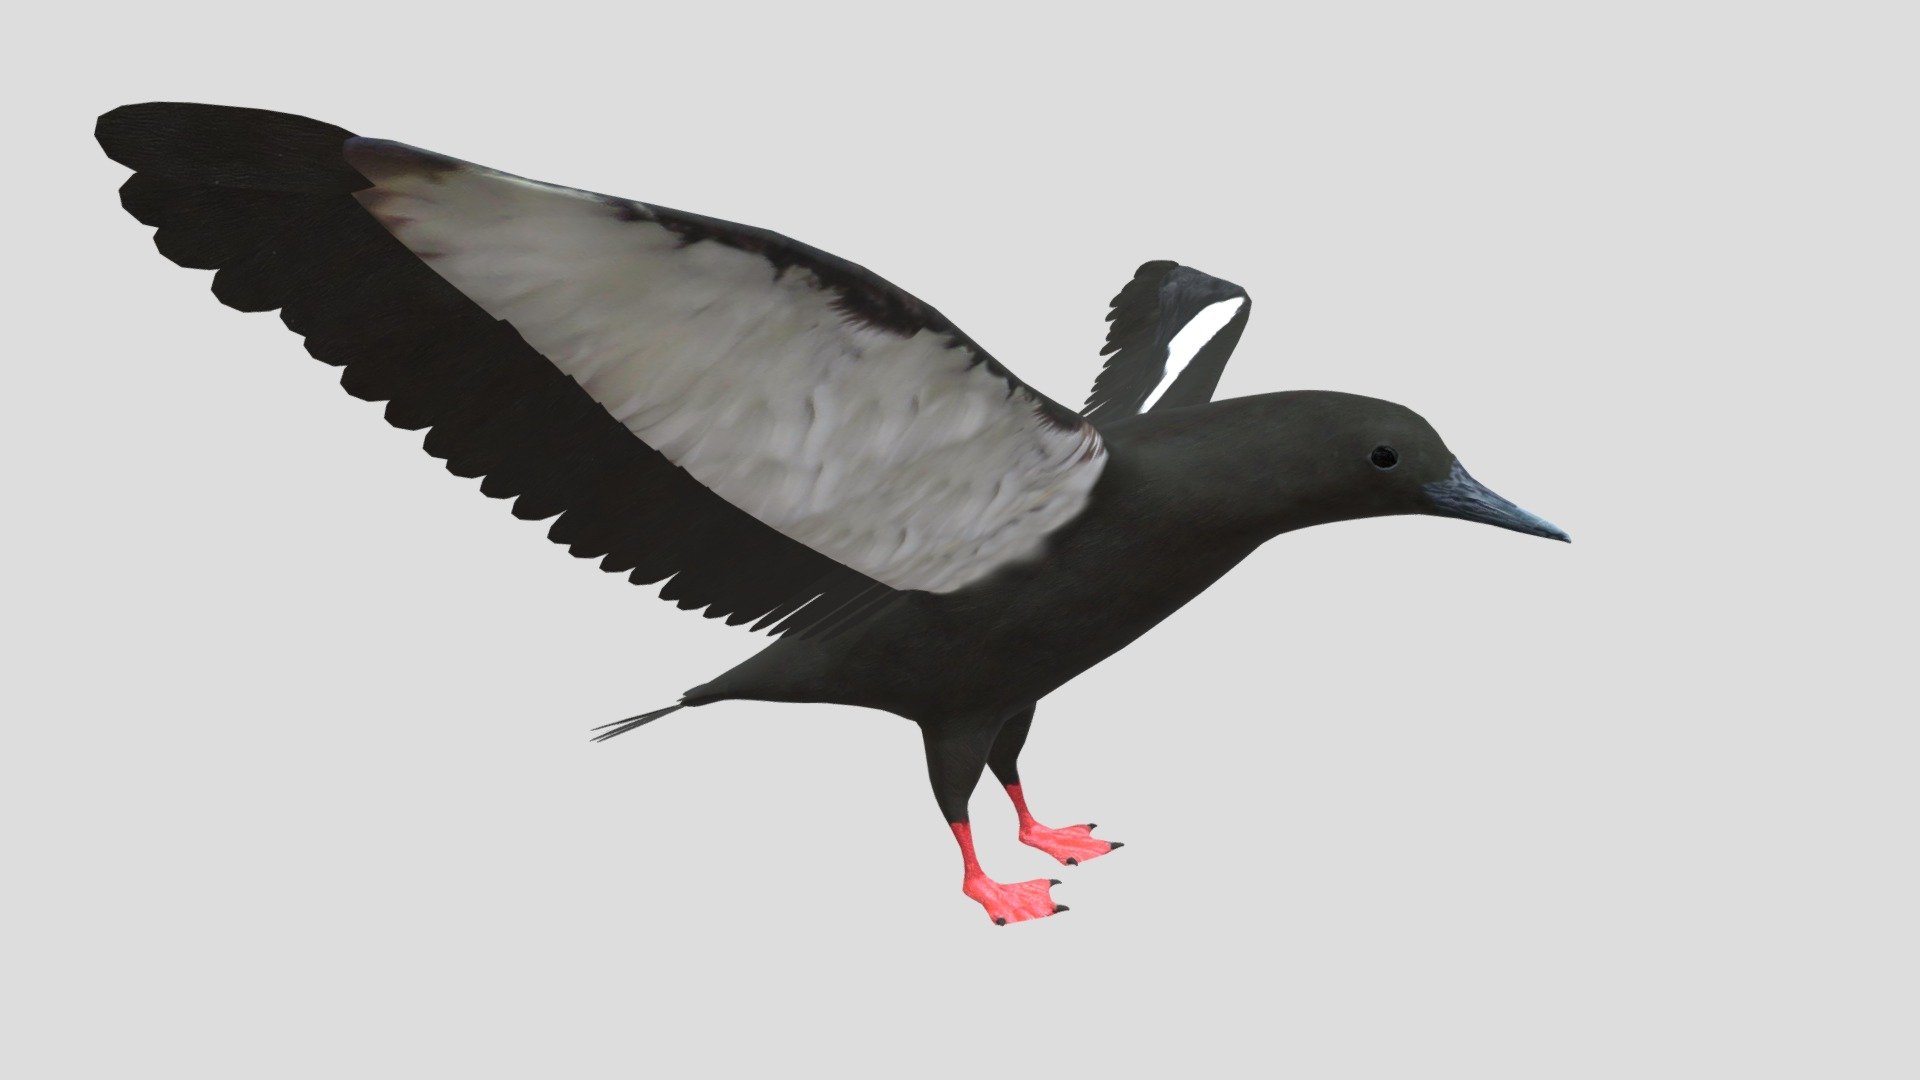 Digital 3d model of Black guillemot .

The product includes:
-All textures and materials are mapped in every format.
-Textures JPEG- color,normal,specular and roughness maps
-Texture size 4096 x 4096 pxls.
-No special plugin needed to open scene 3d model